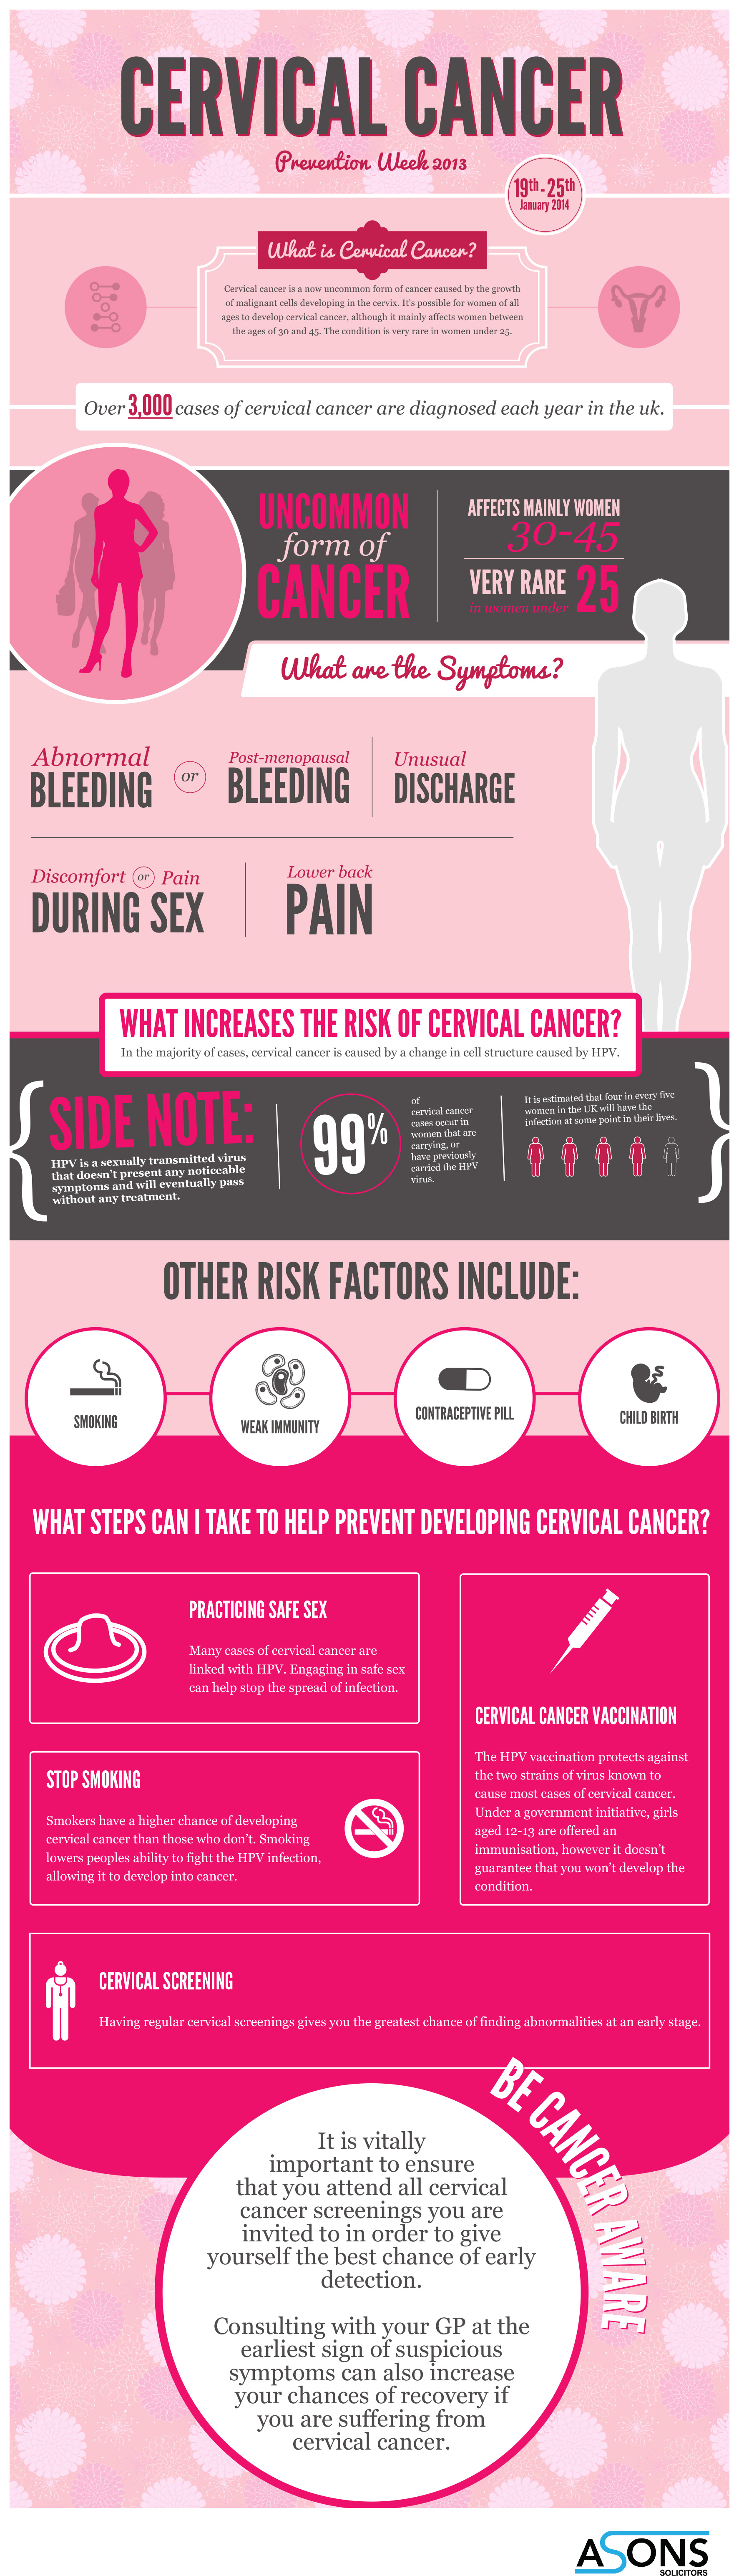 research articles on cervical cancer